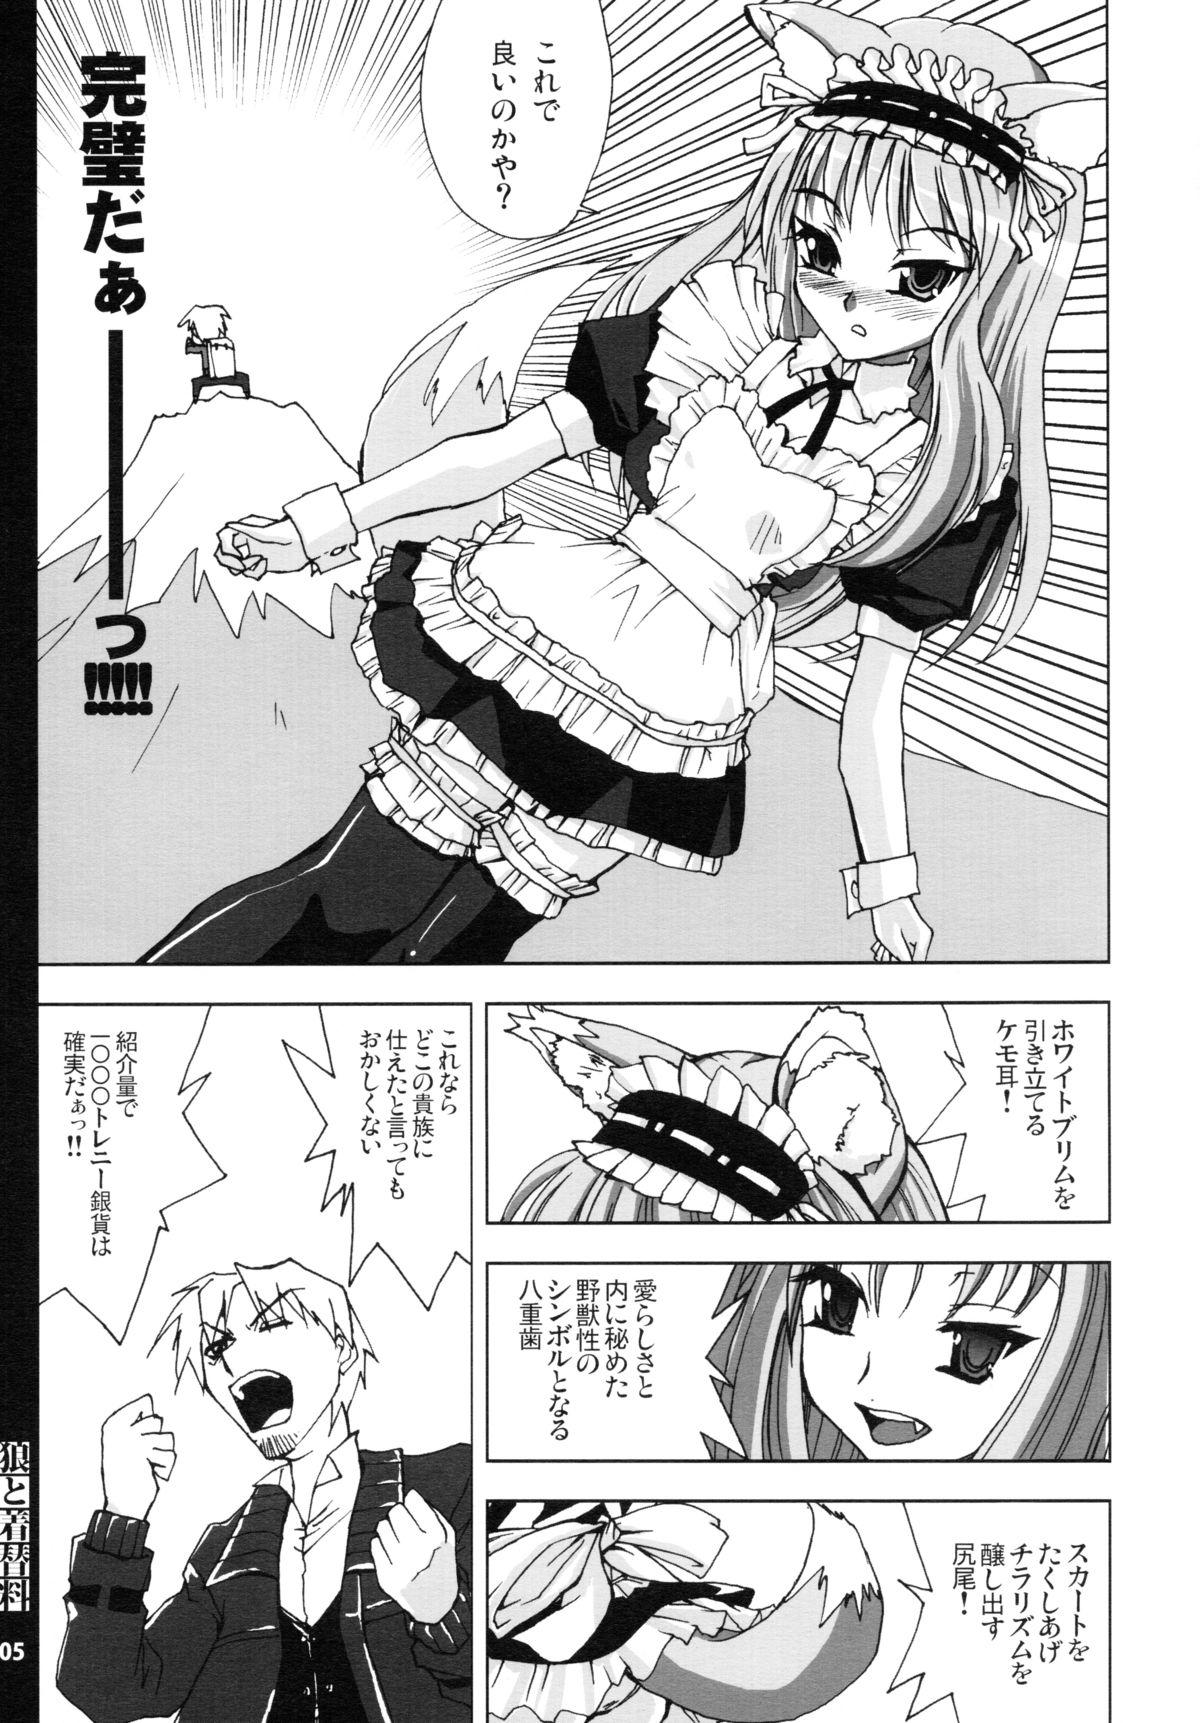 Pornstars Ookami to Cosplay-ryou - Spice and wolf Russia - Page 5